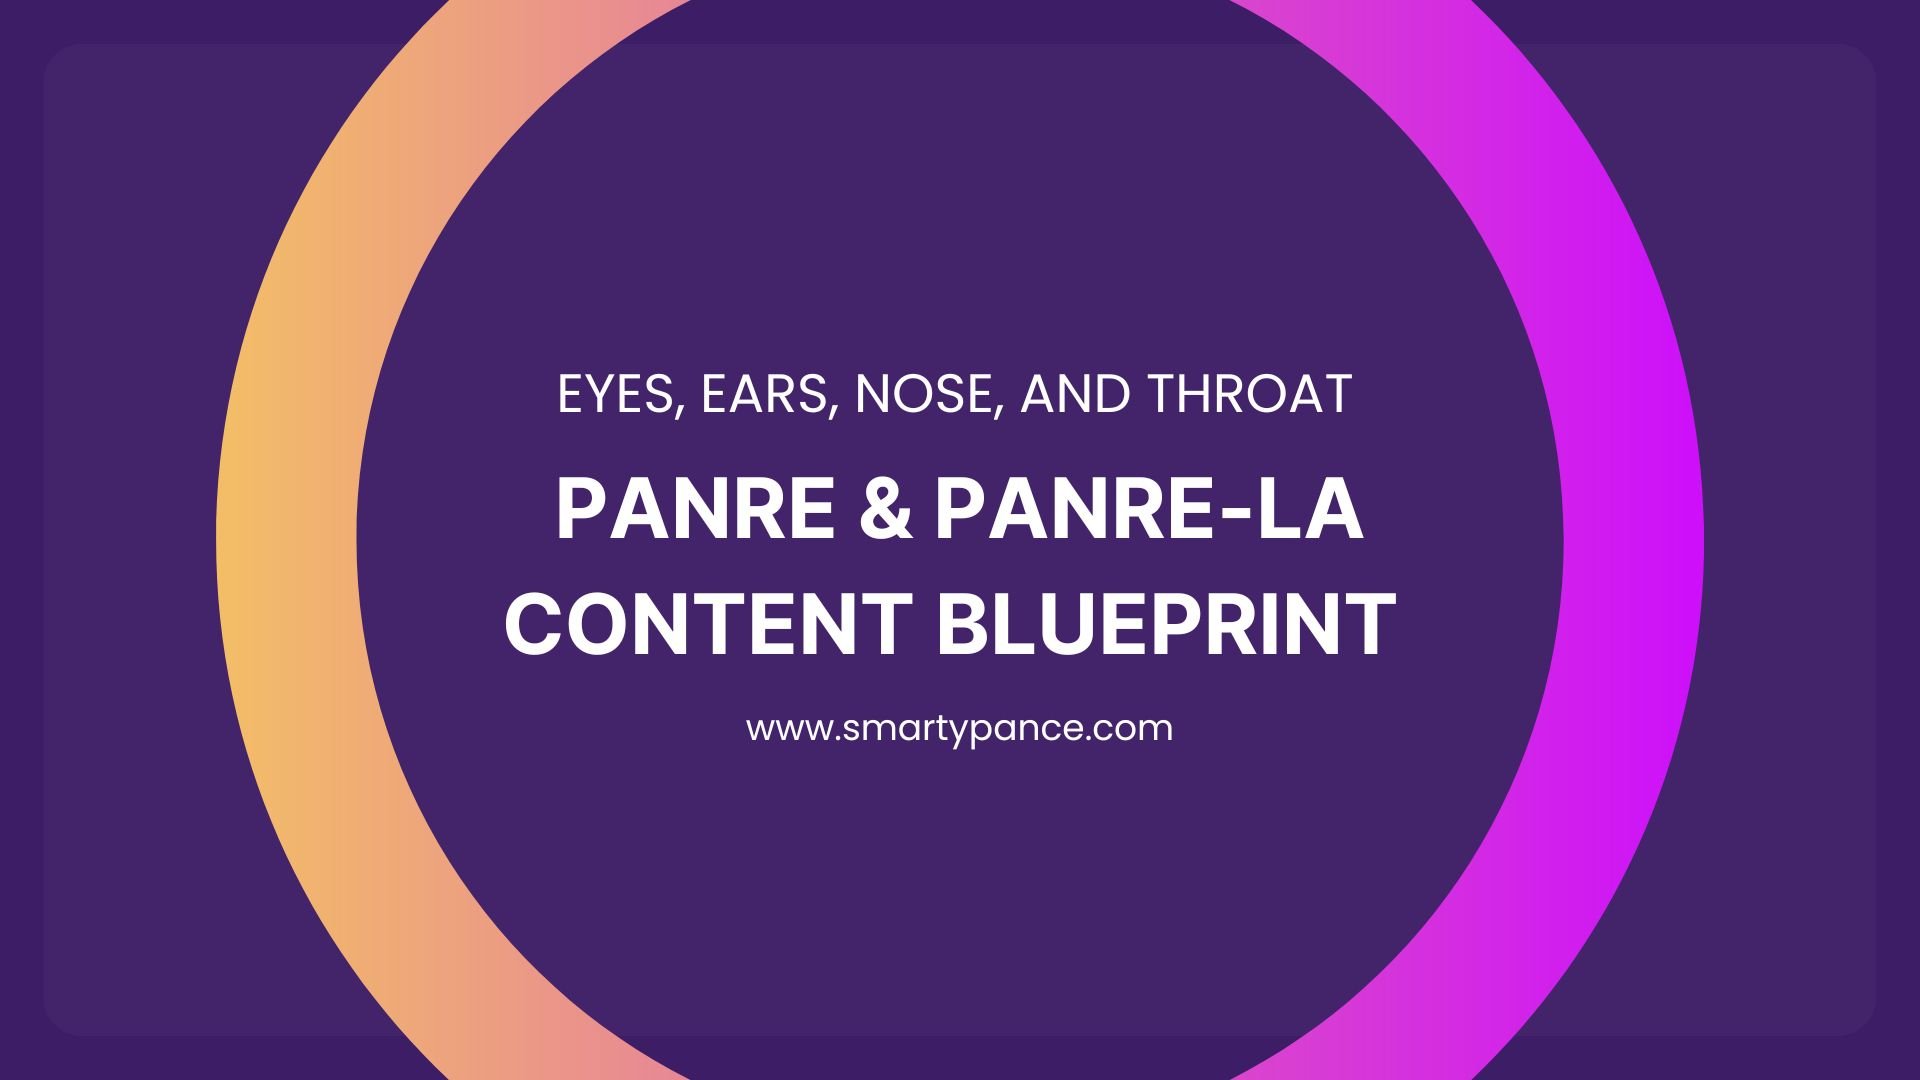 Eyes, Ears, Nose, and Throat - Smarty PANCE PANRE and PANRE-LA Interactive Content Blueprint